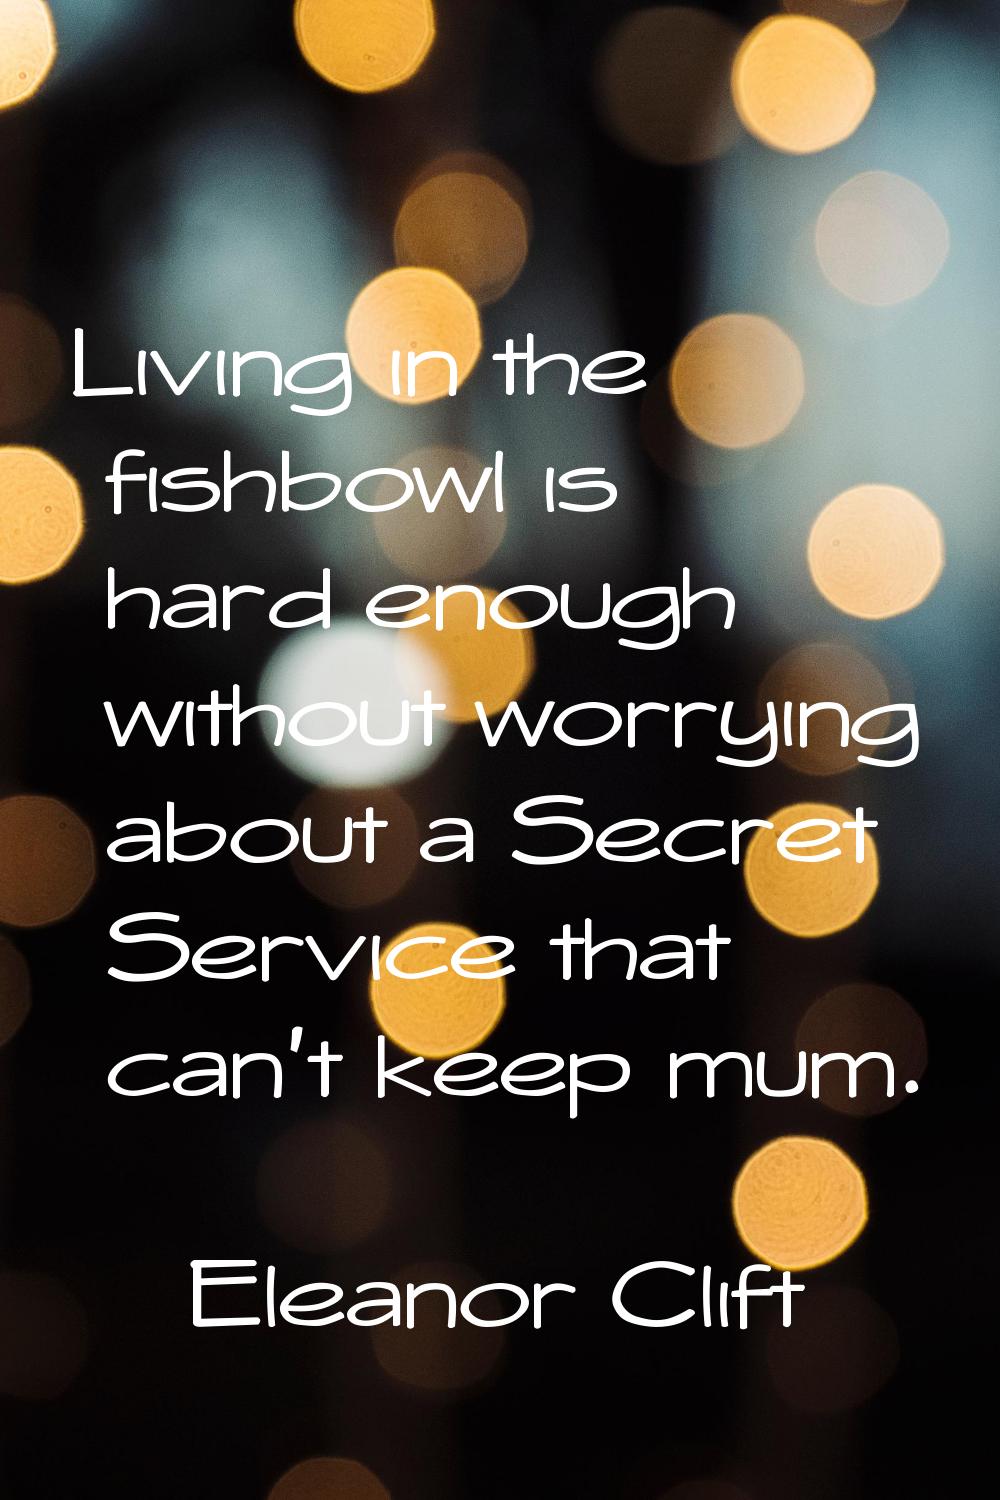 Living in the fishbowl is hard enough without worrying about a Secret Service that can't keep mum.